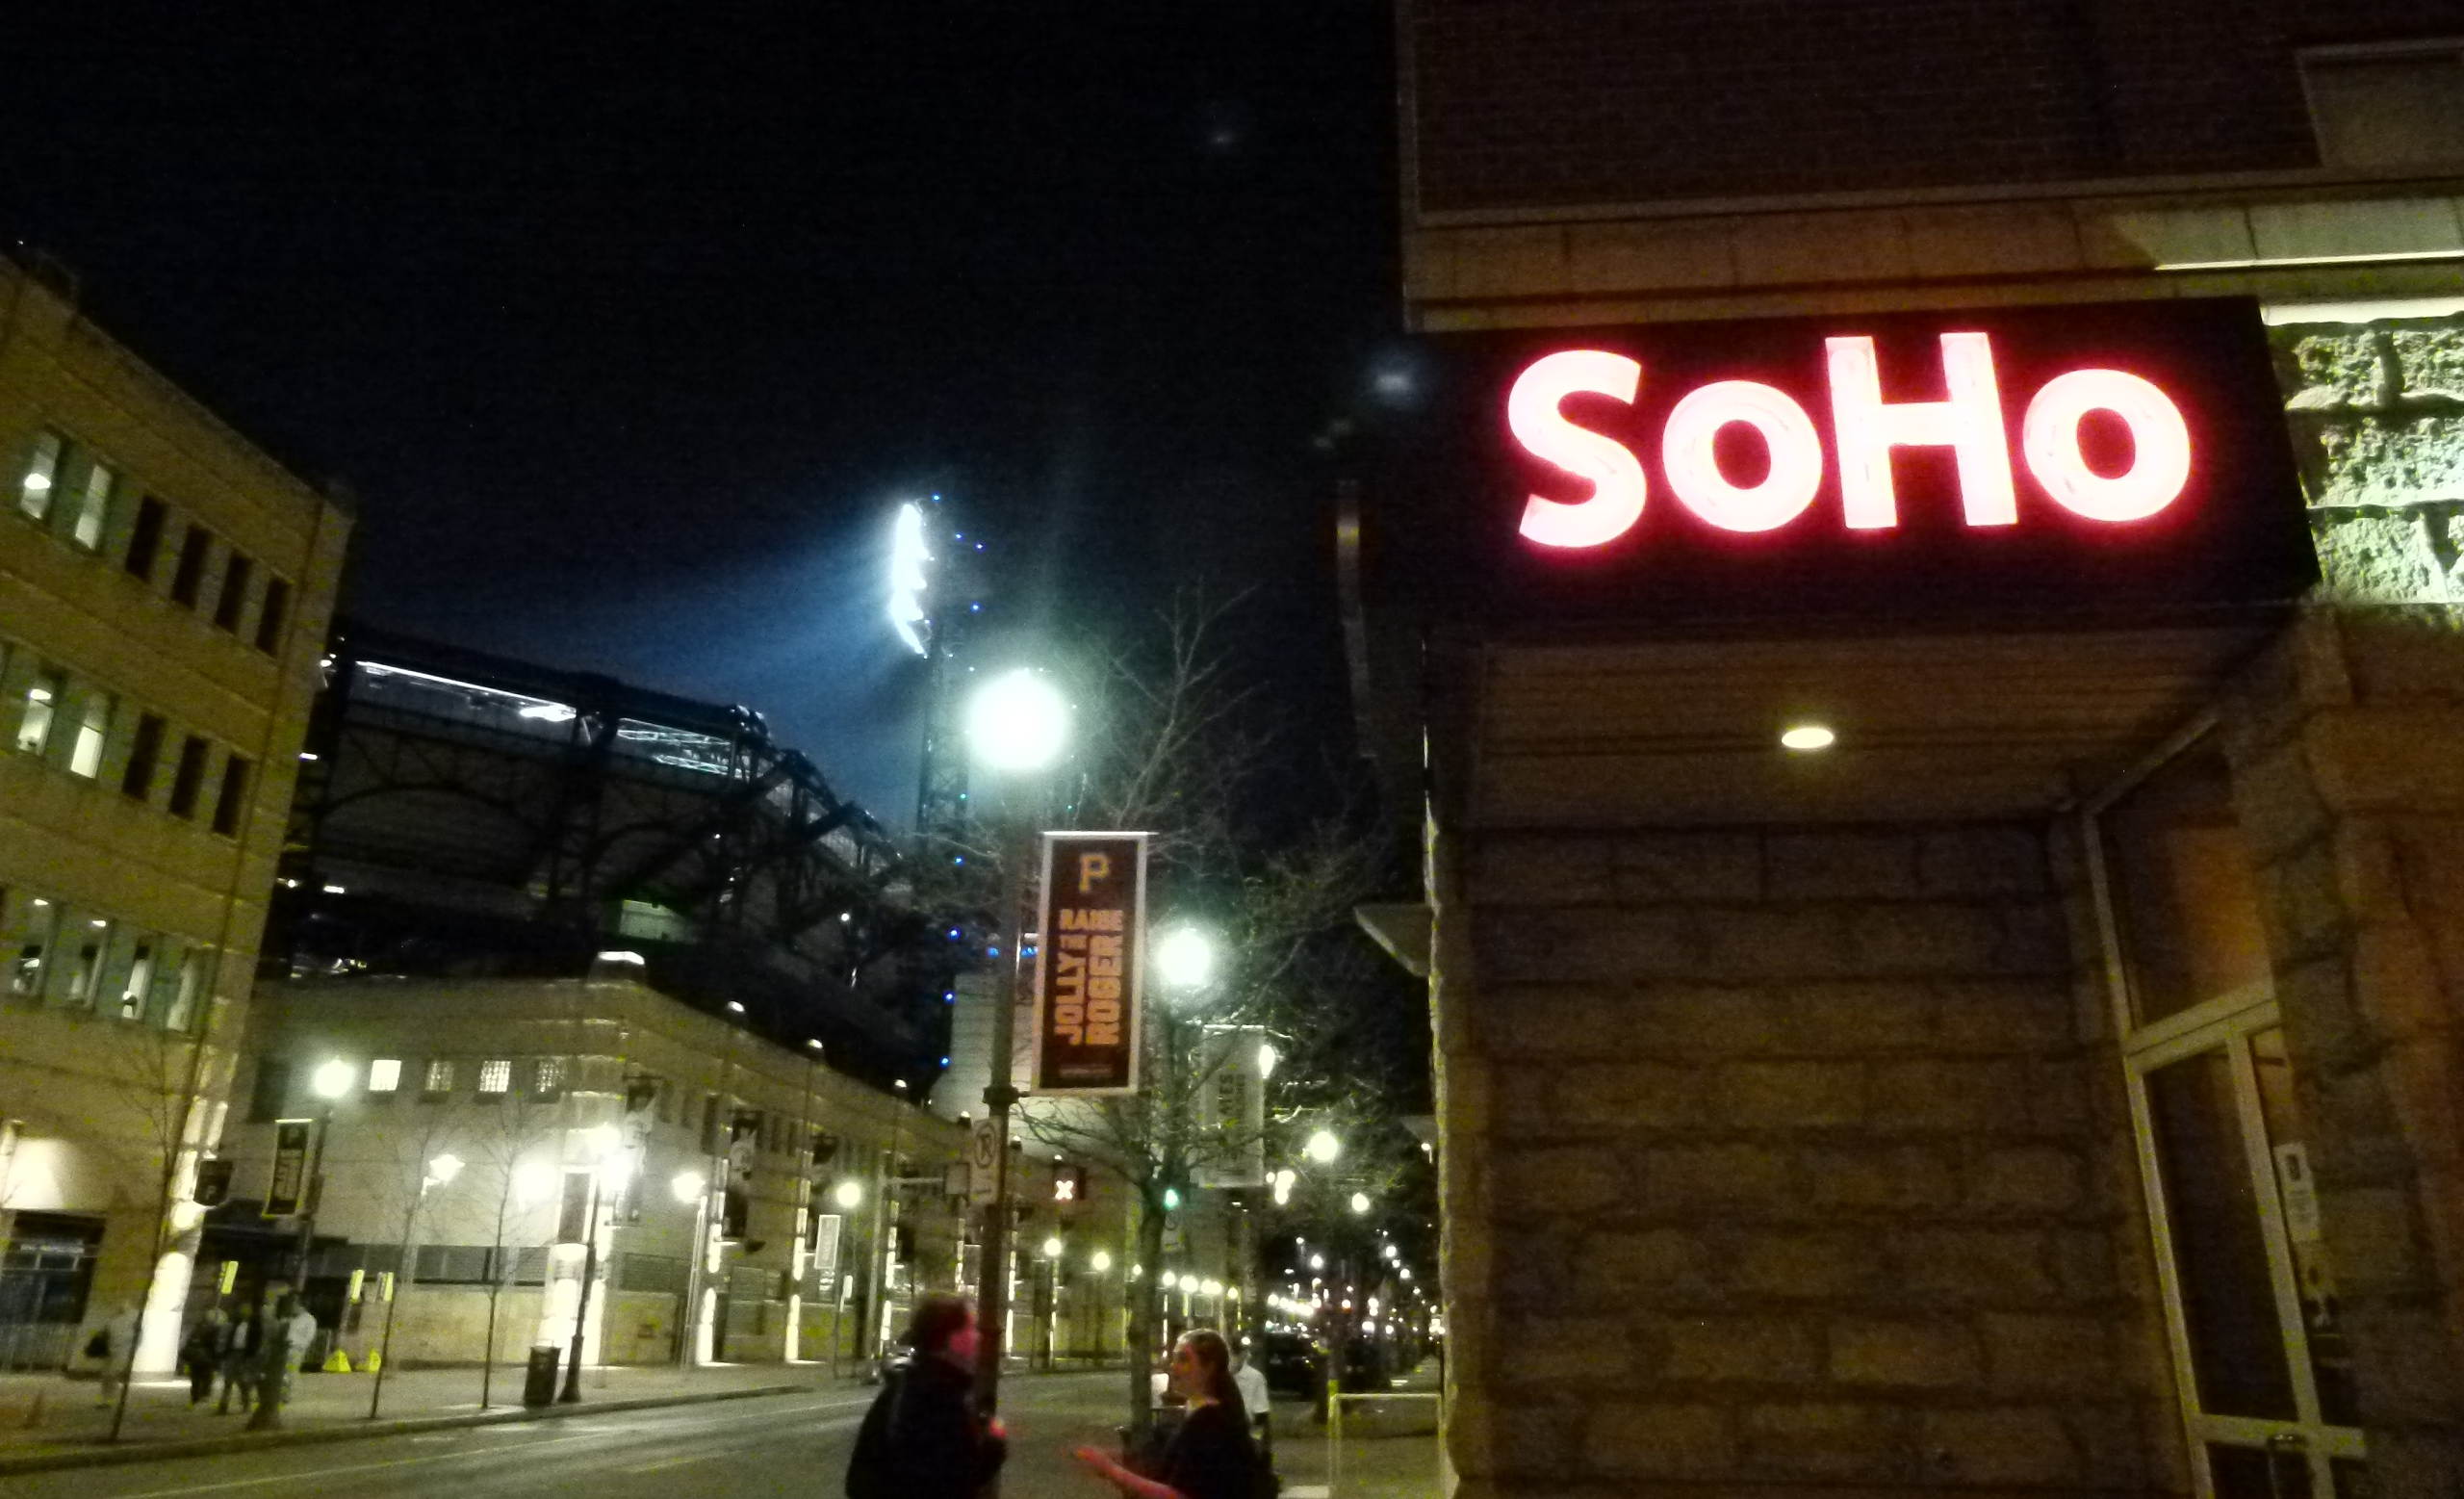 SoHo is just across the street from PNC Park.